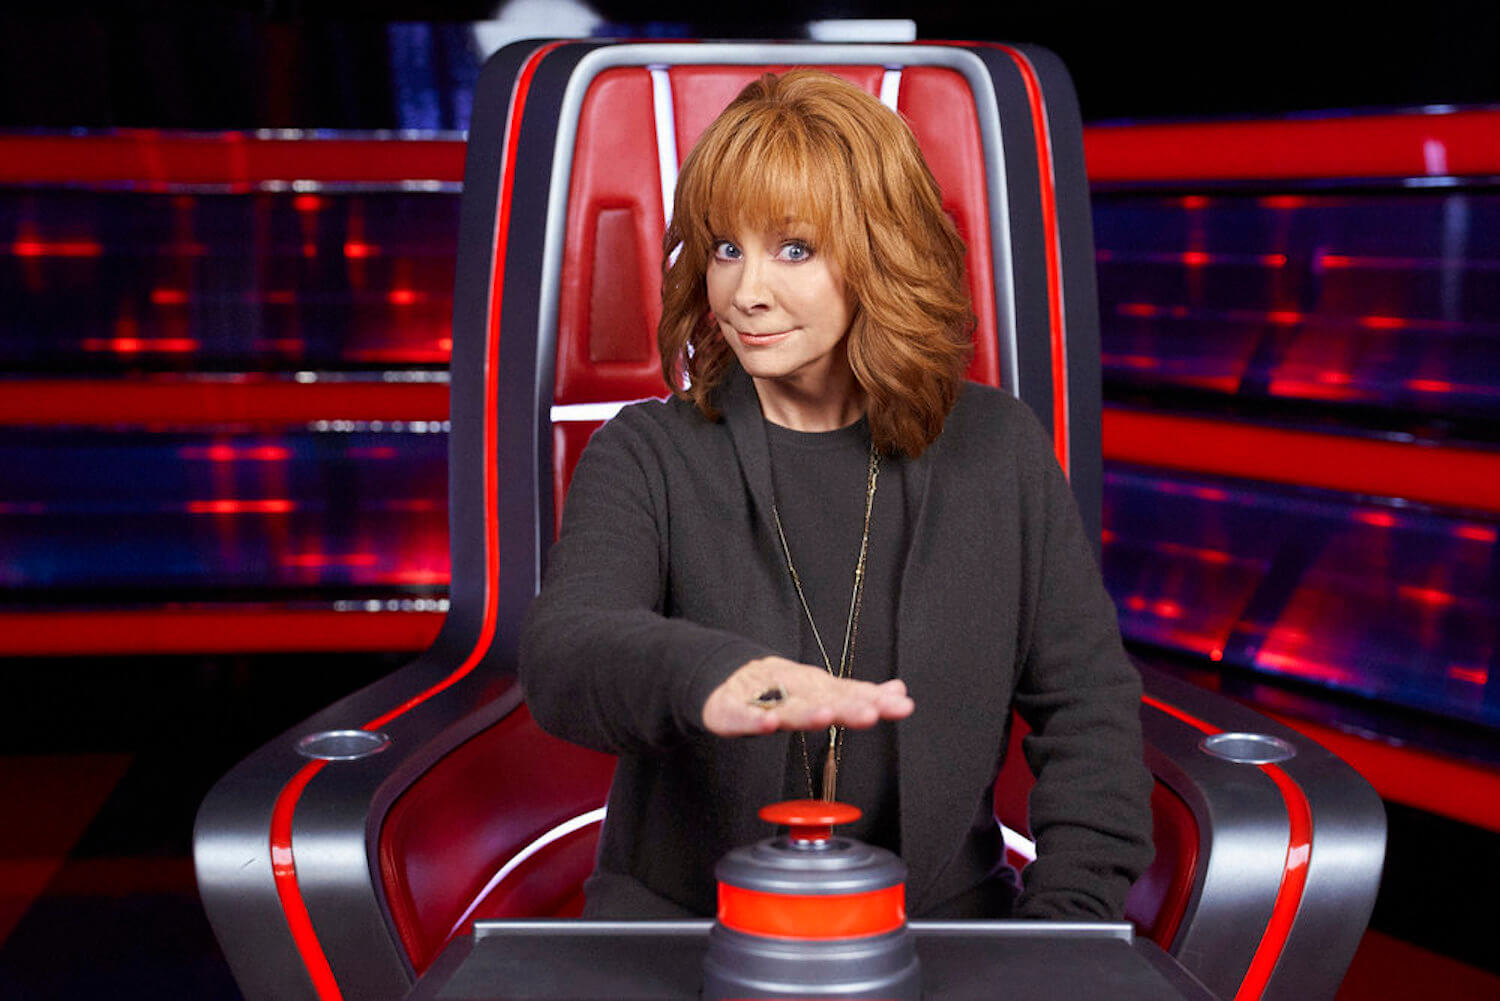 Reba McEntire on 'The Voice' Season 23 sitting in a judges chair about to hit the red buzzer